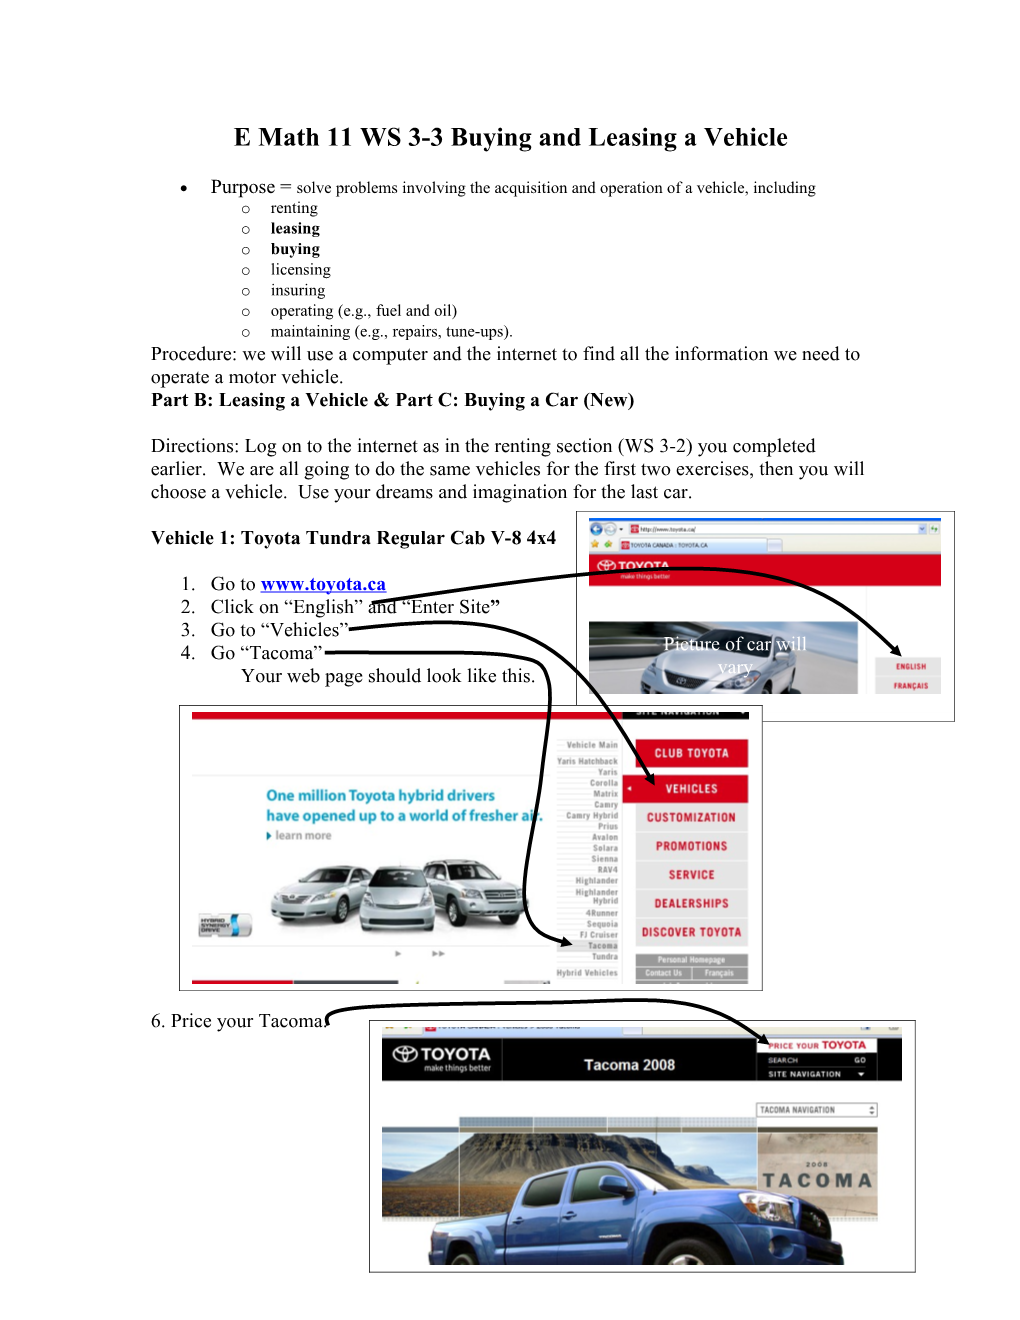 E Math 11 WS 3-3 Buying and Leasing a Vehicle